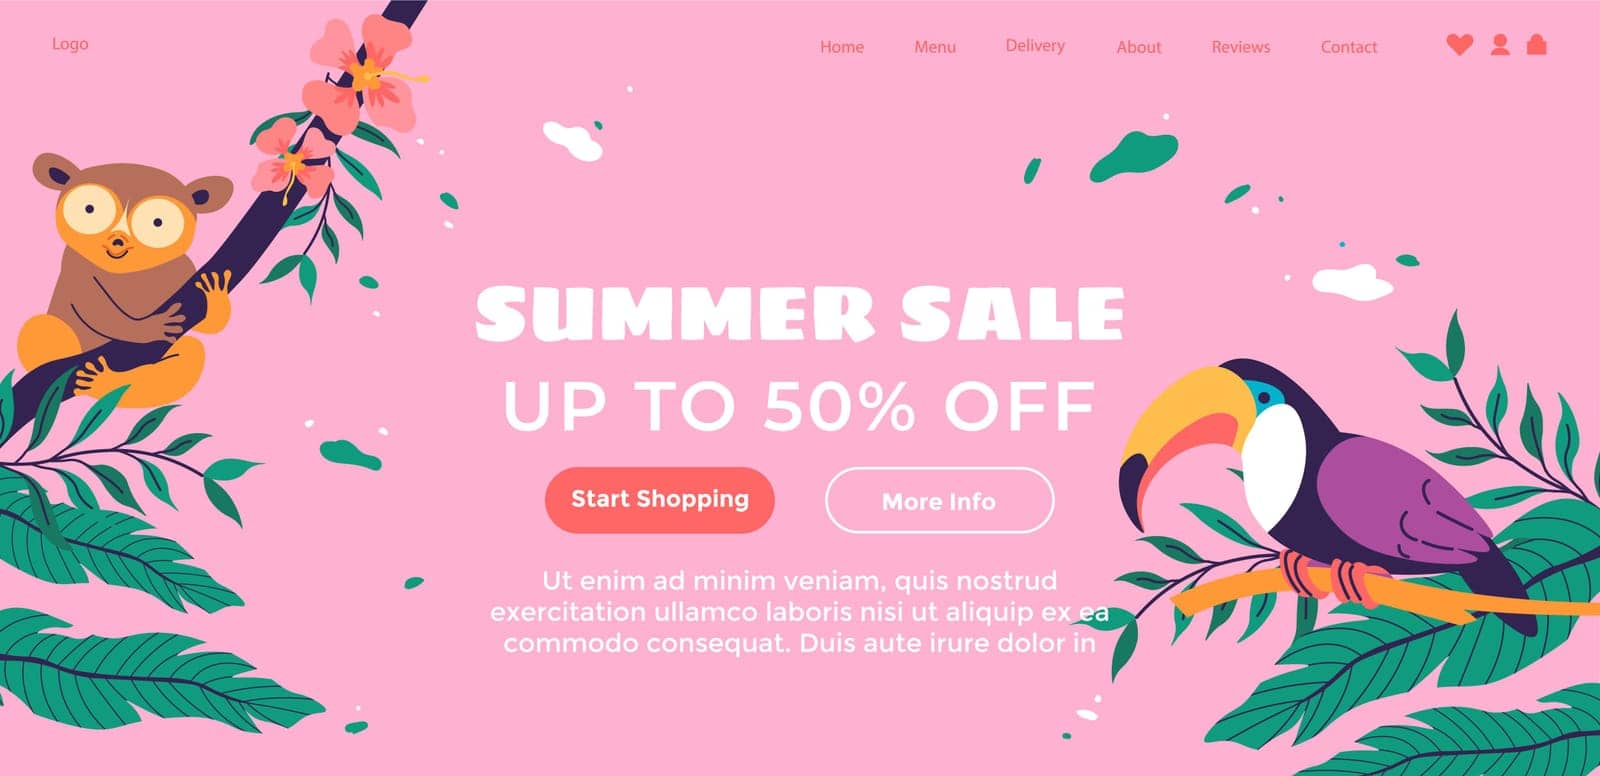 Summer sale up to fifty percent off start shopping by Sonulkaster